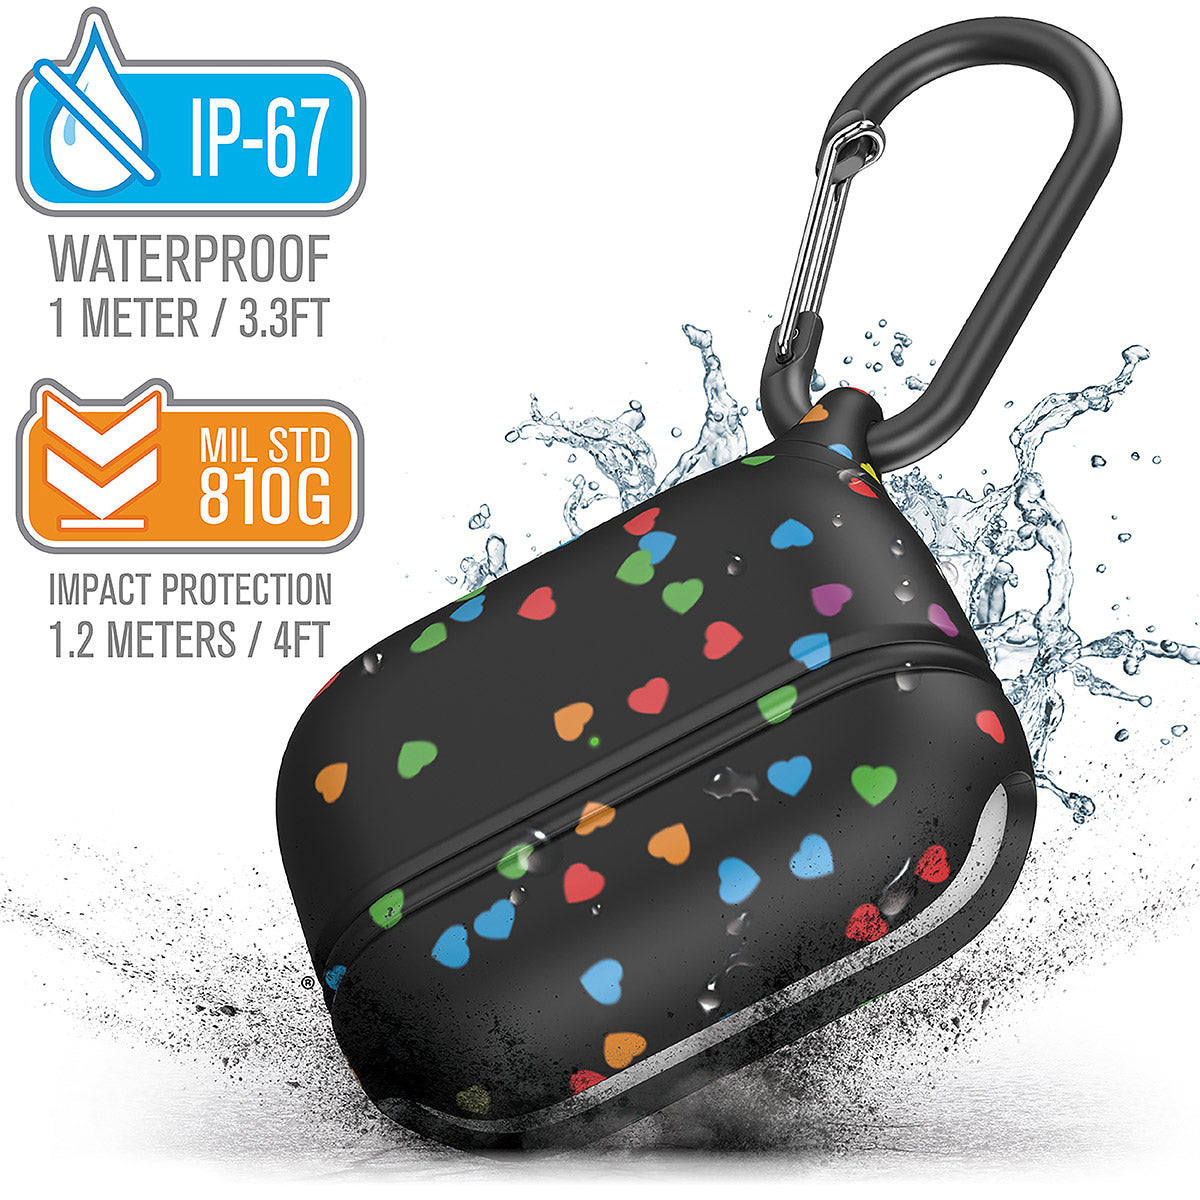 CATAPLAPDPROHTB | catalyst airpods pro gen 2 1 waterproof case carabiner special edition black with hearts with cracked floor and splashes of water text reads ip-67 waterproof 1 meter 3.3ft mil std 810g impact protection 1.2 meters 4ft